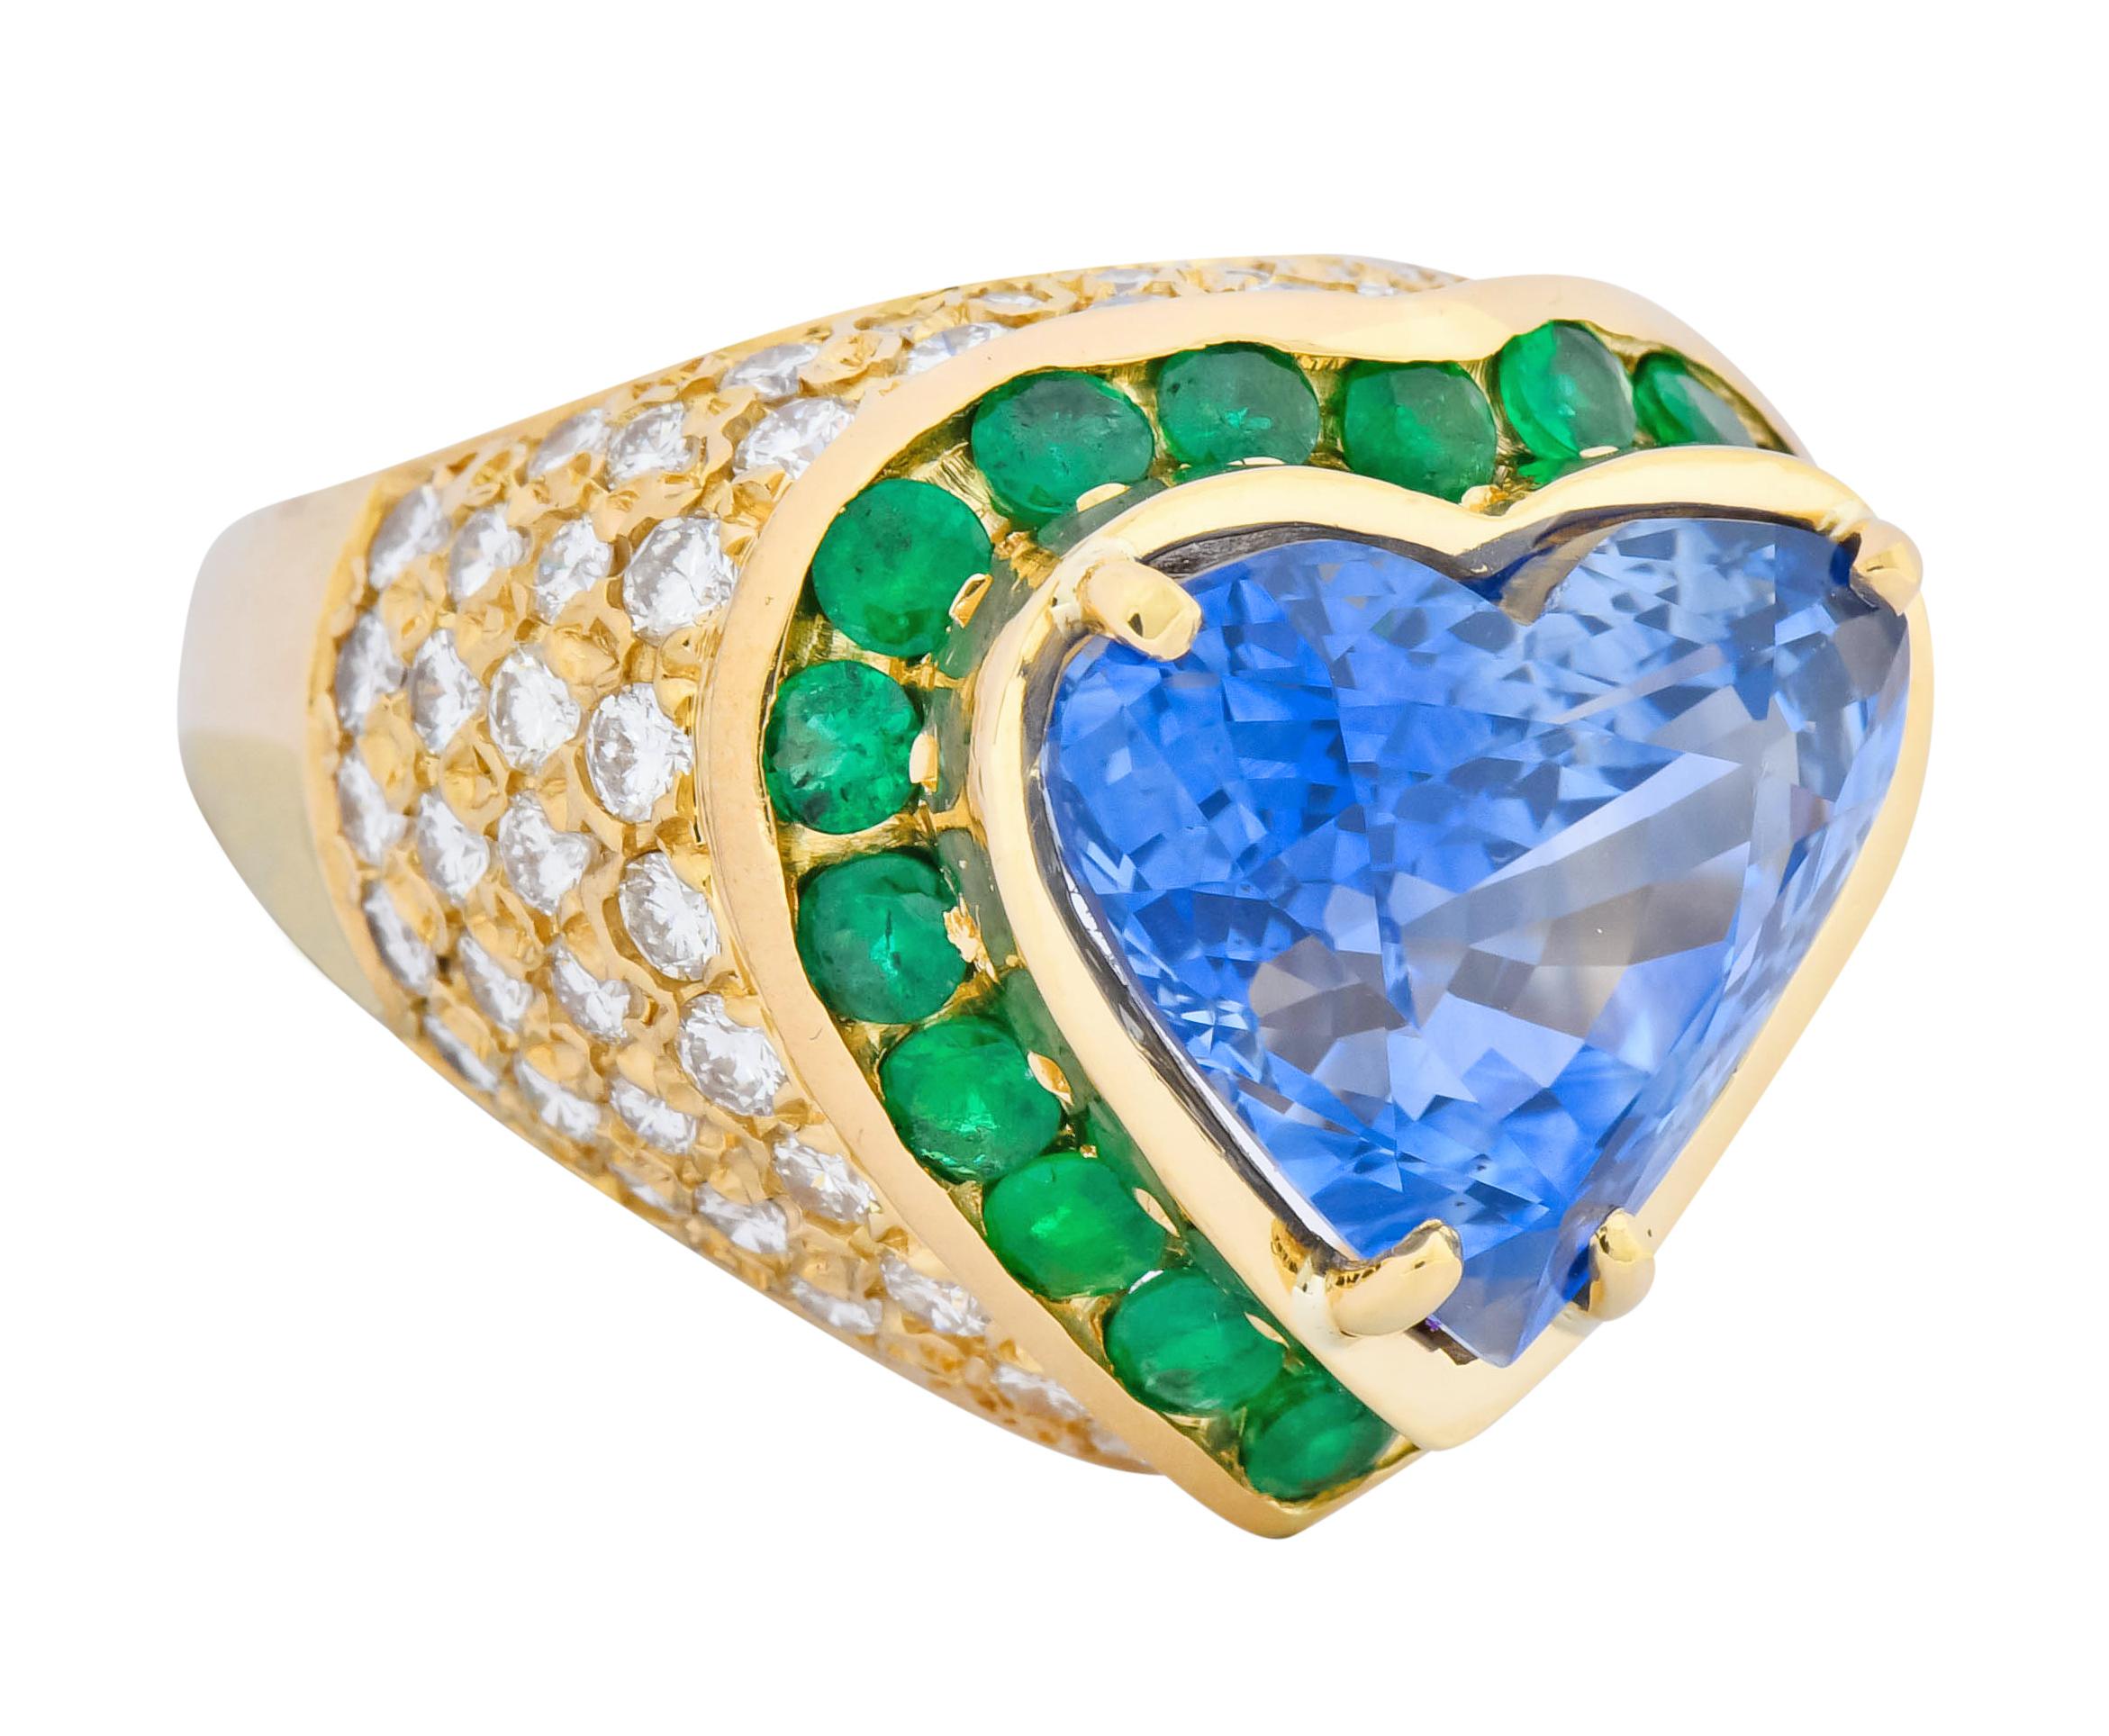 Centering a prong set heart cut sapphire weighing approximately 10.89 carats total, transparent and cornflower blue in color

Surrounded by a vibrantly green round cut emerald halo weighing approximately 1.00 carat total

With round brilliant